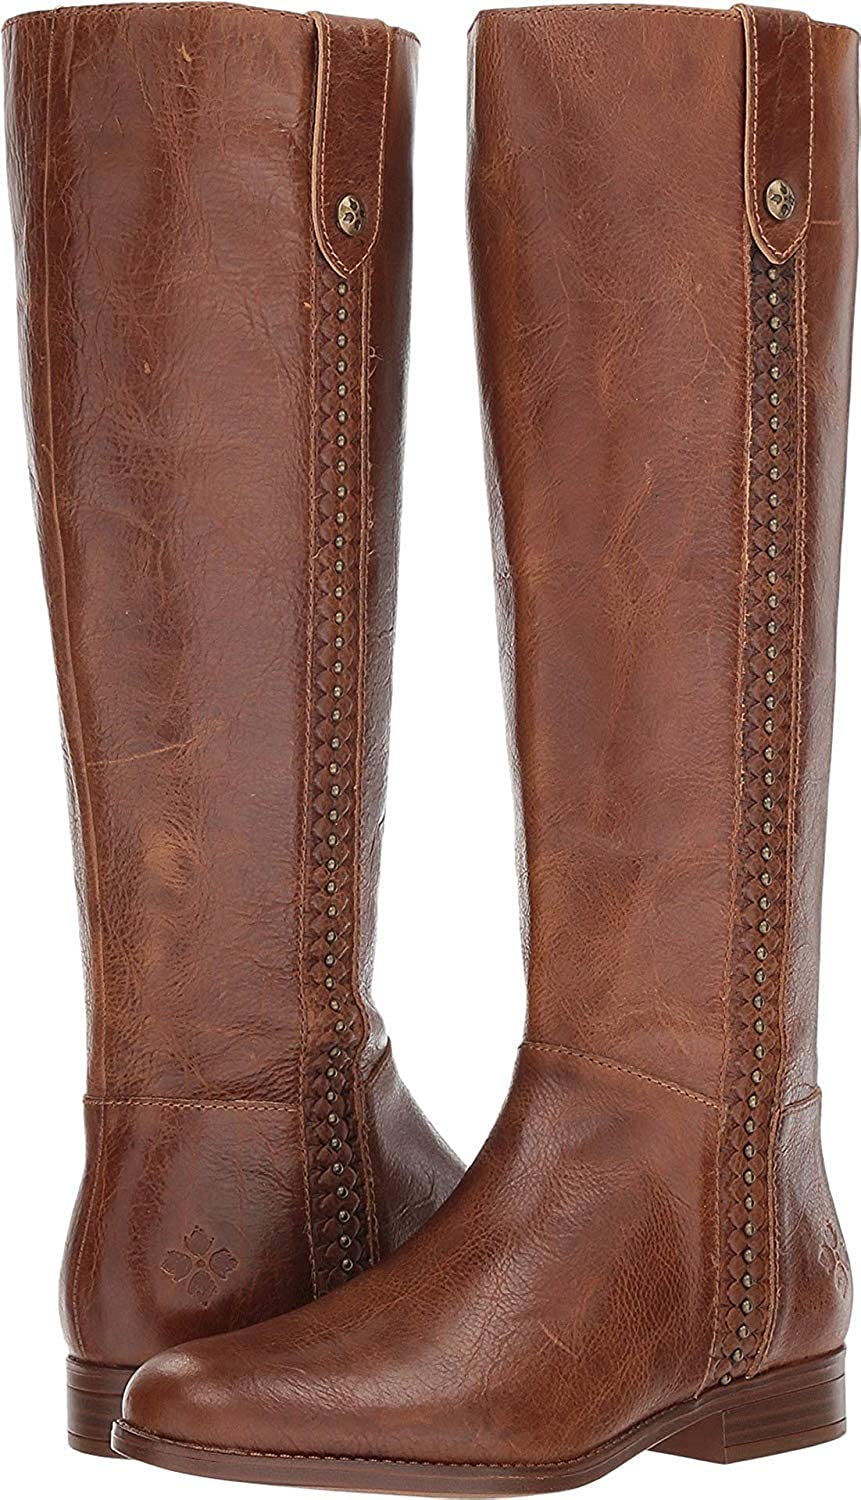 Patricia Nash Womens Carlina Leather Almond Toe Knee High, Brown, Size ...